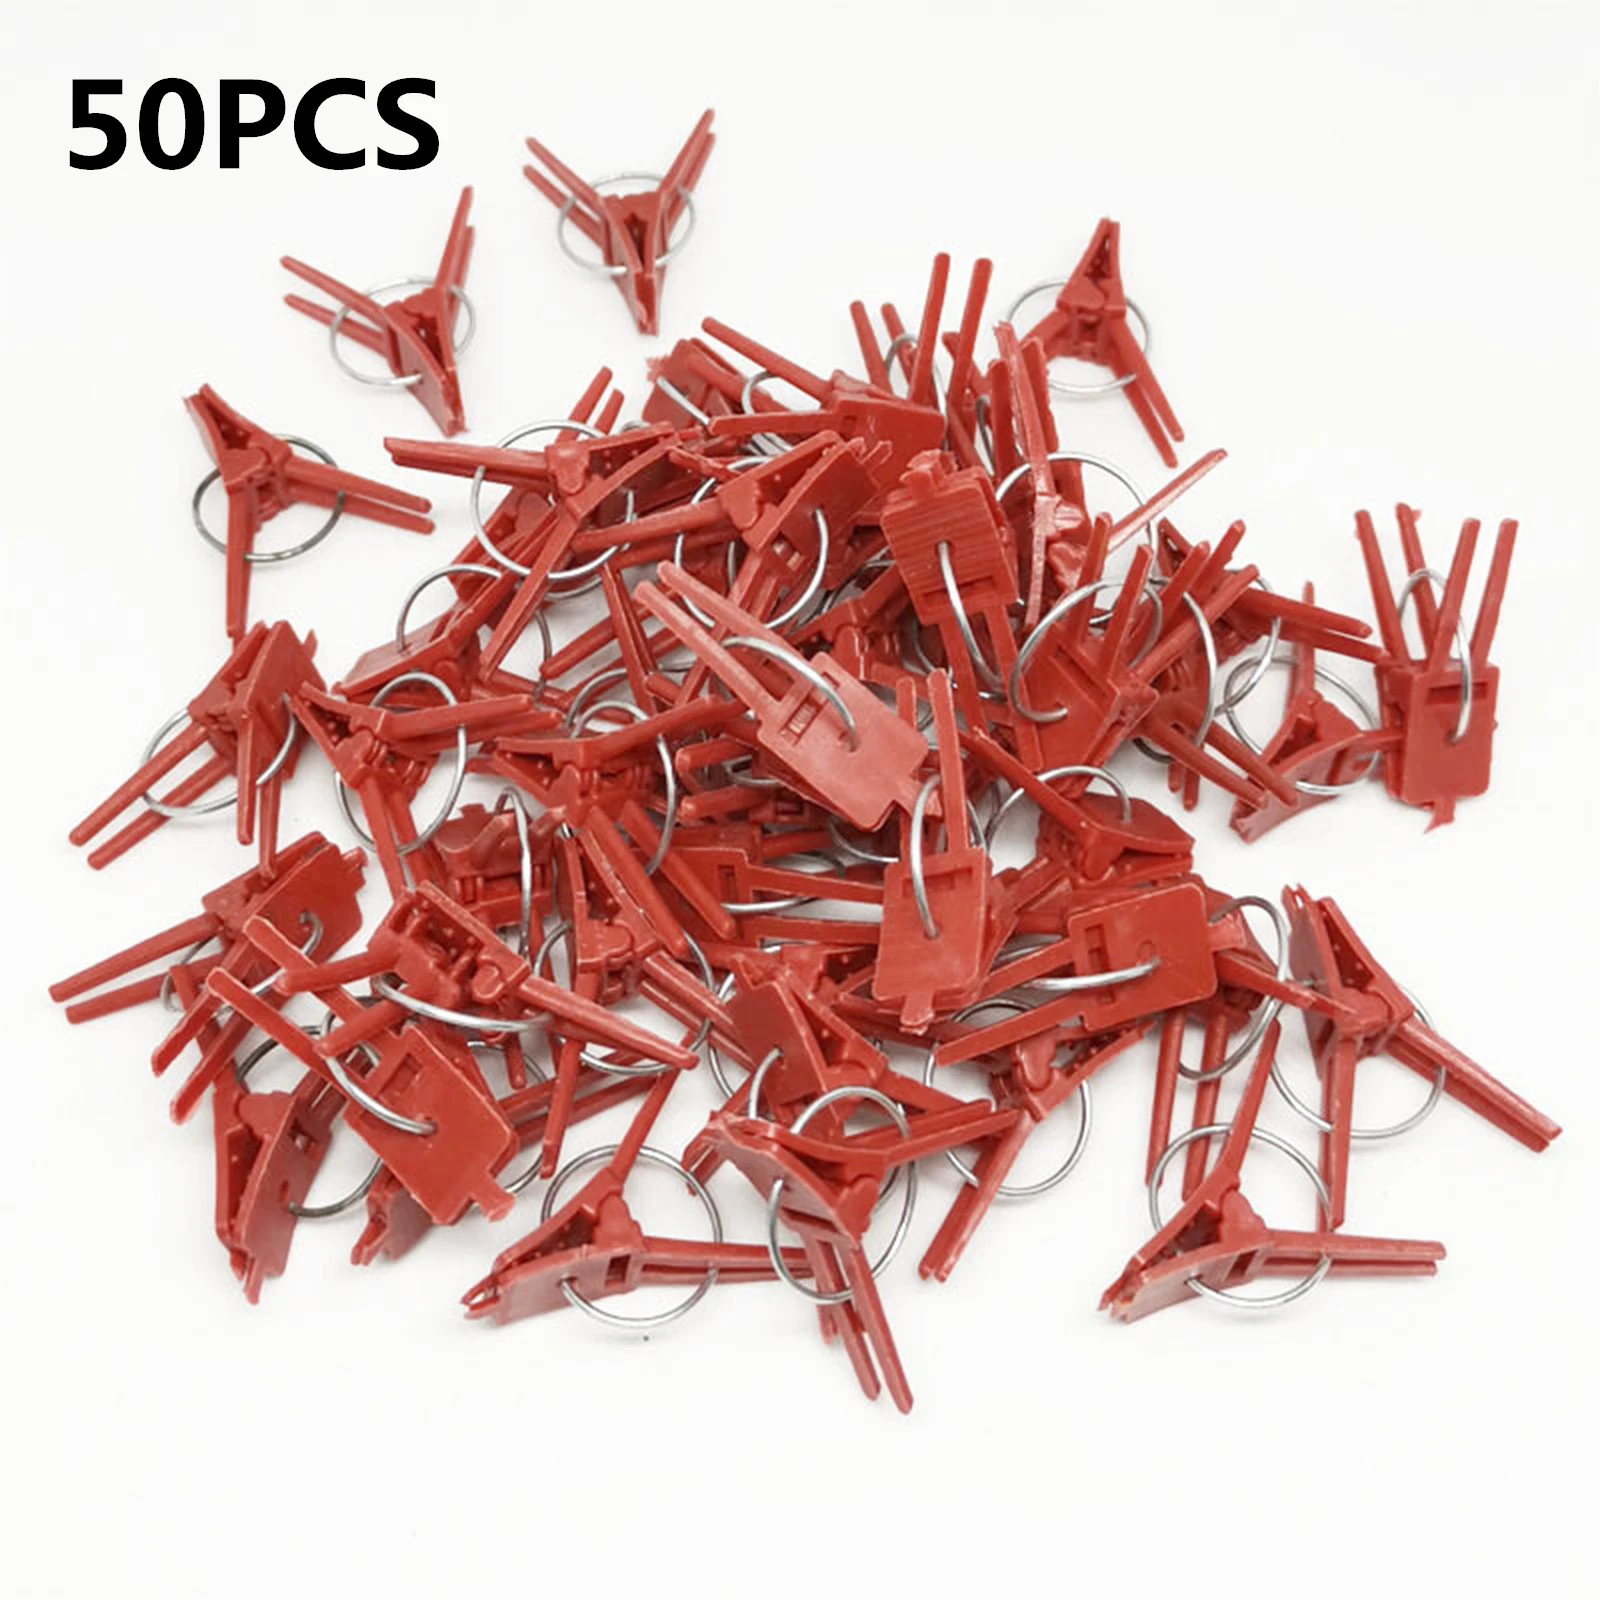 

50PCS Quality Plants Graft Clips Plastic fixing fastening Fixture clamp Garden Tools for Cucumber Eggplant Watermelon